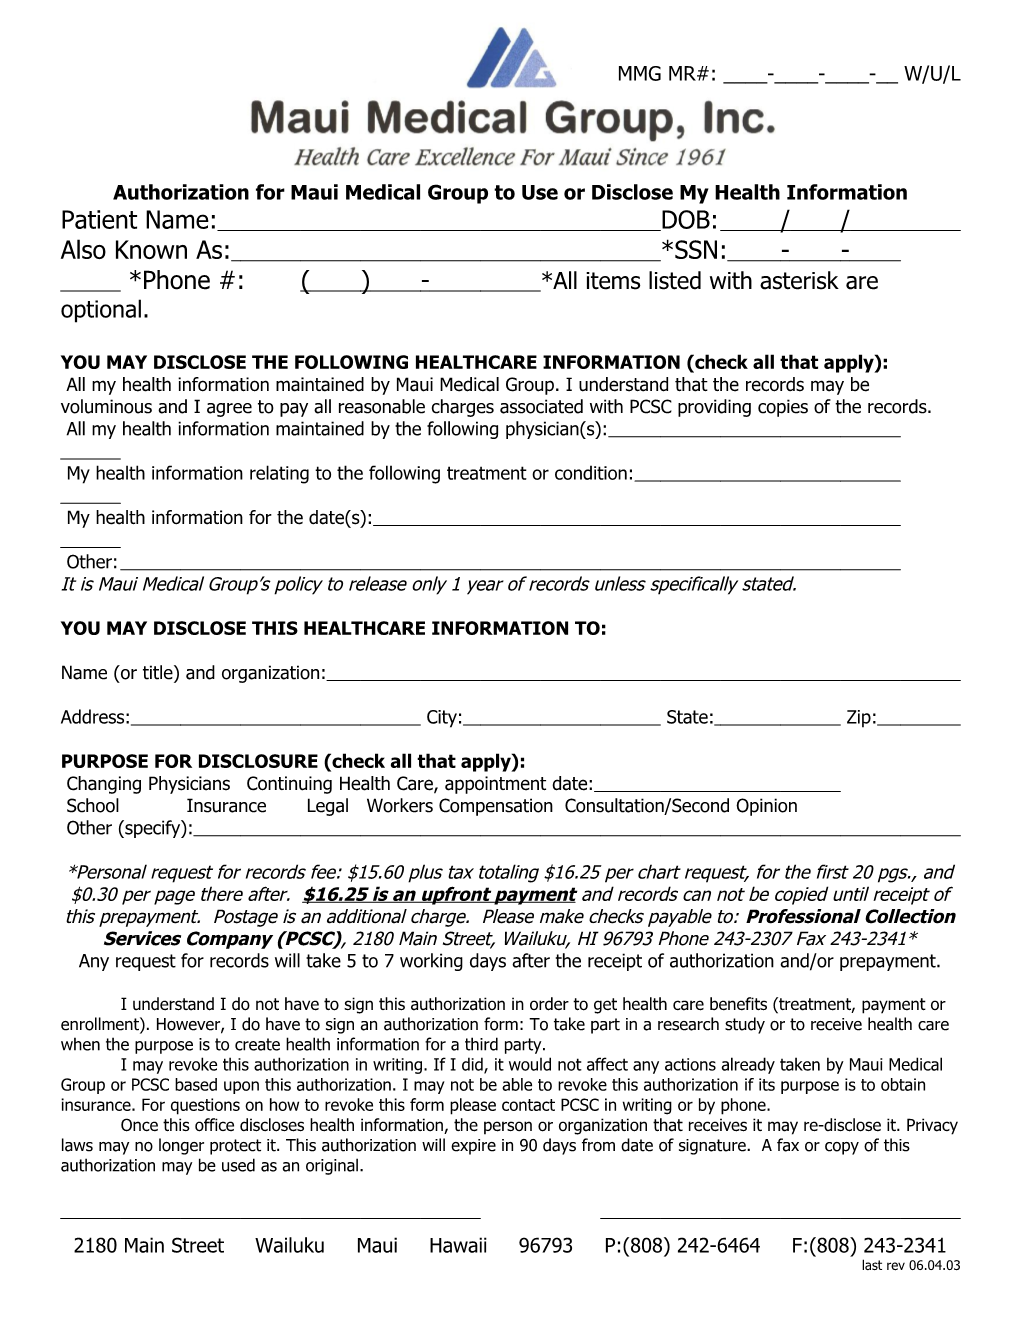 Authorization for Maui Medical Group to Use Or Disclose My Health Information